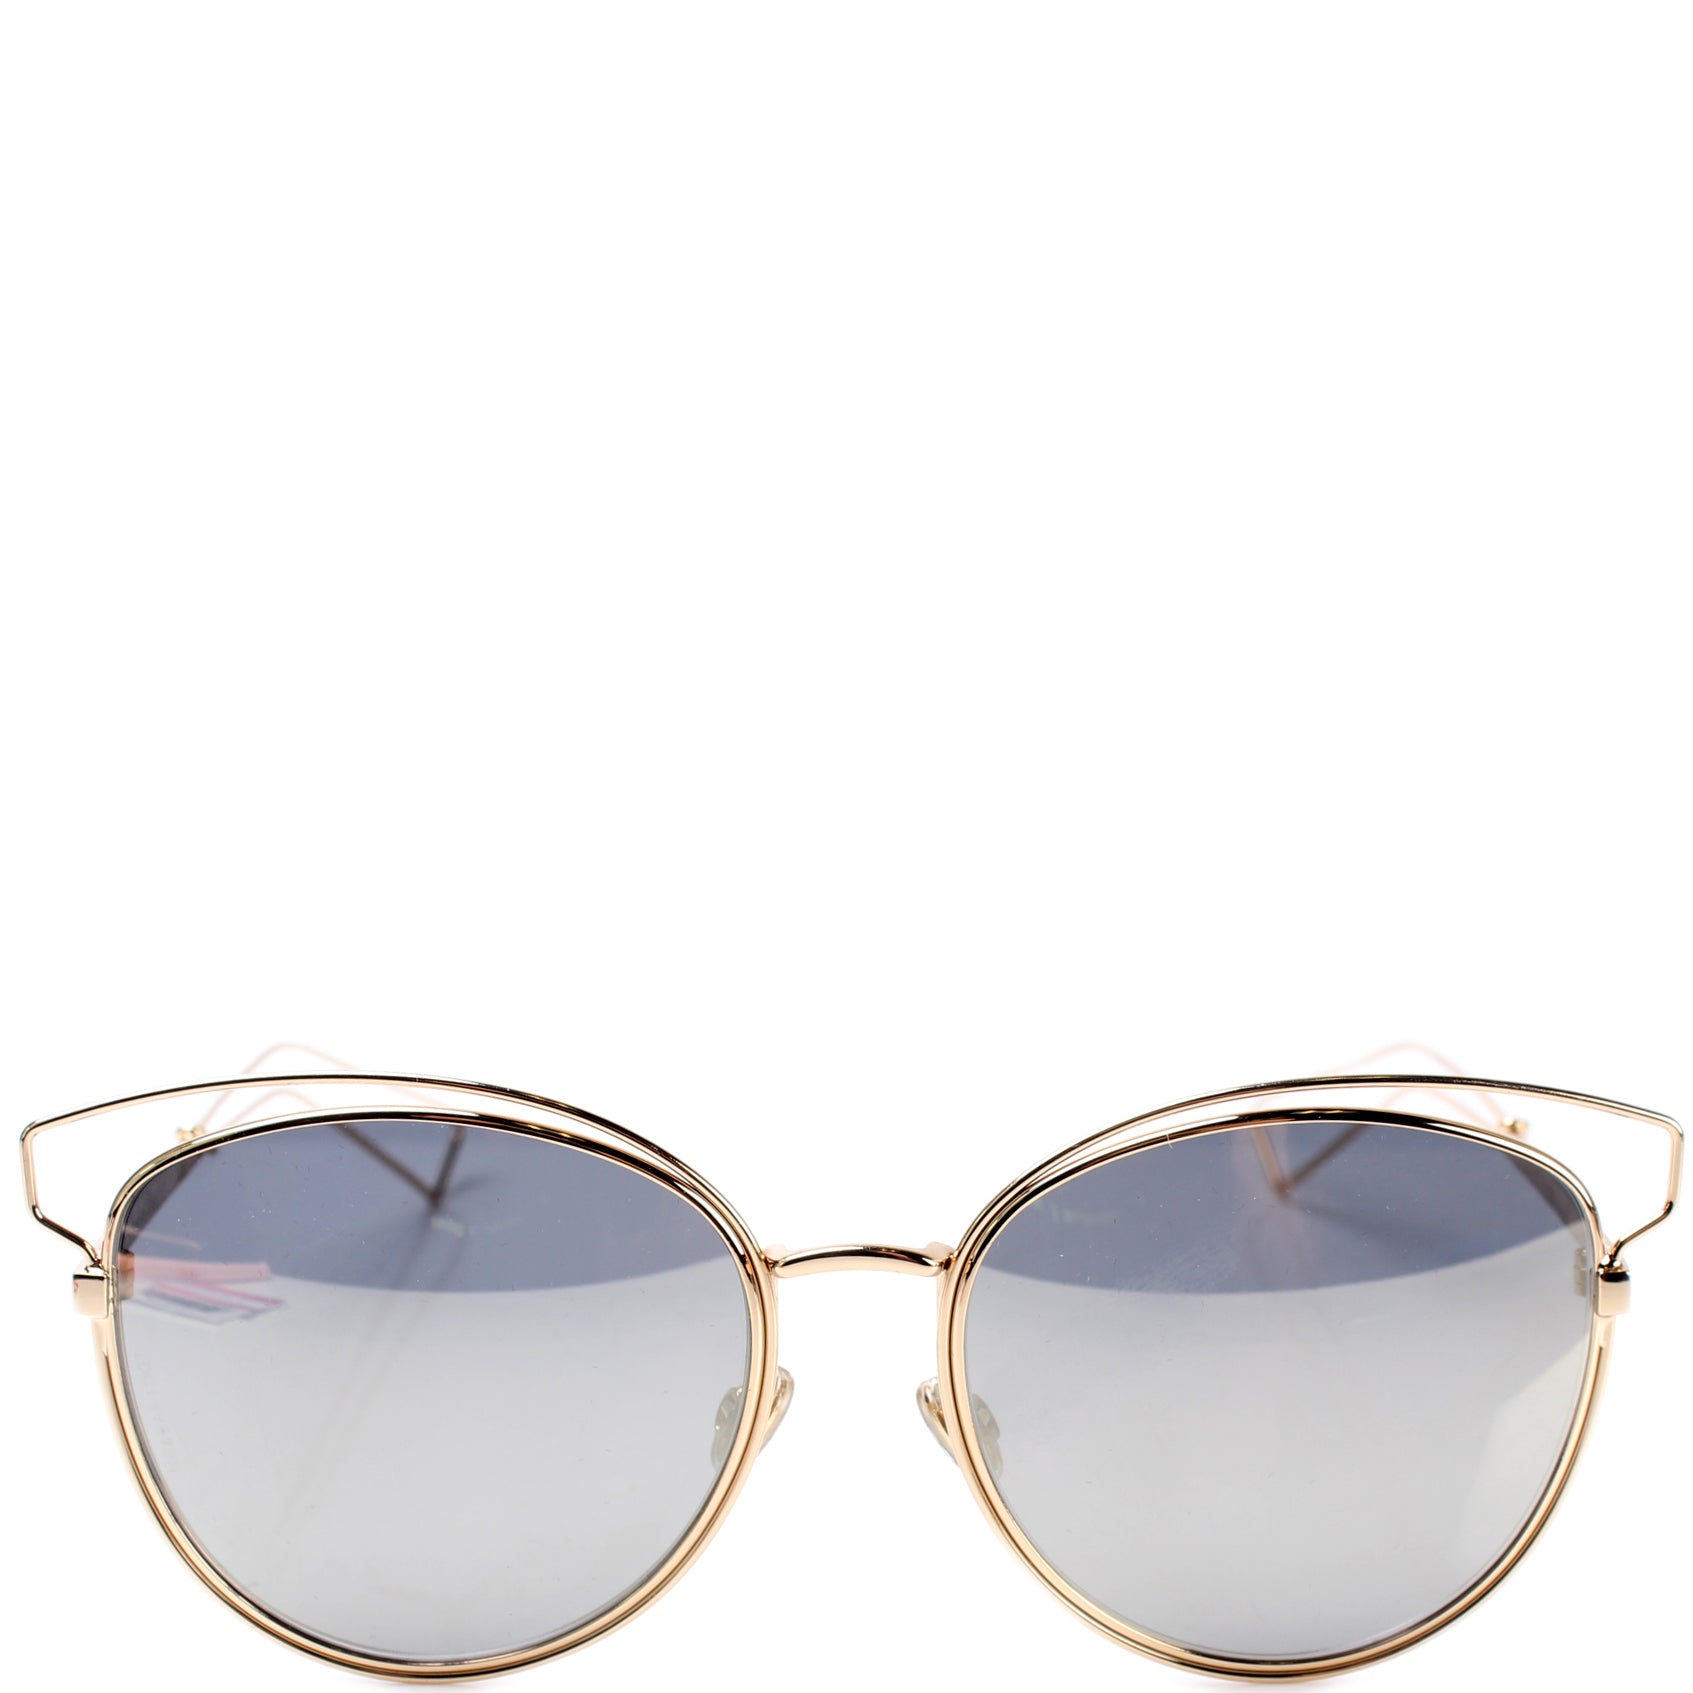 Dior Sideral 2 Sunglasses Gold frame with  Depop